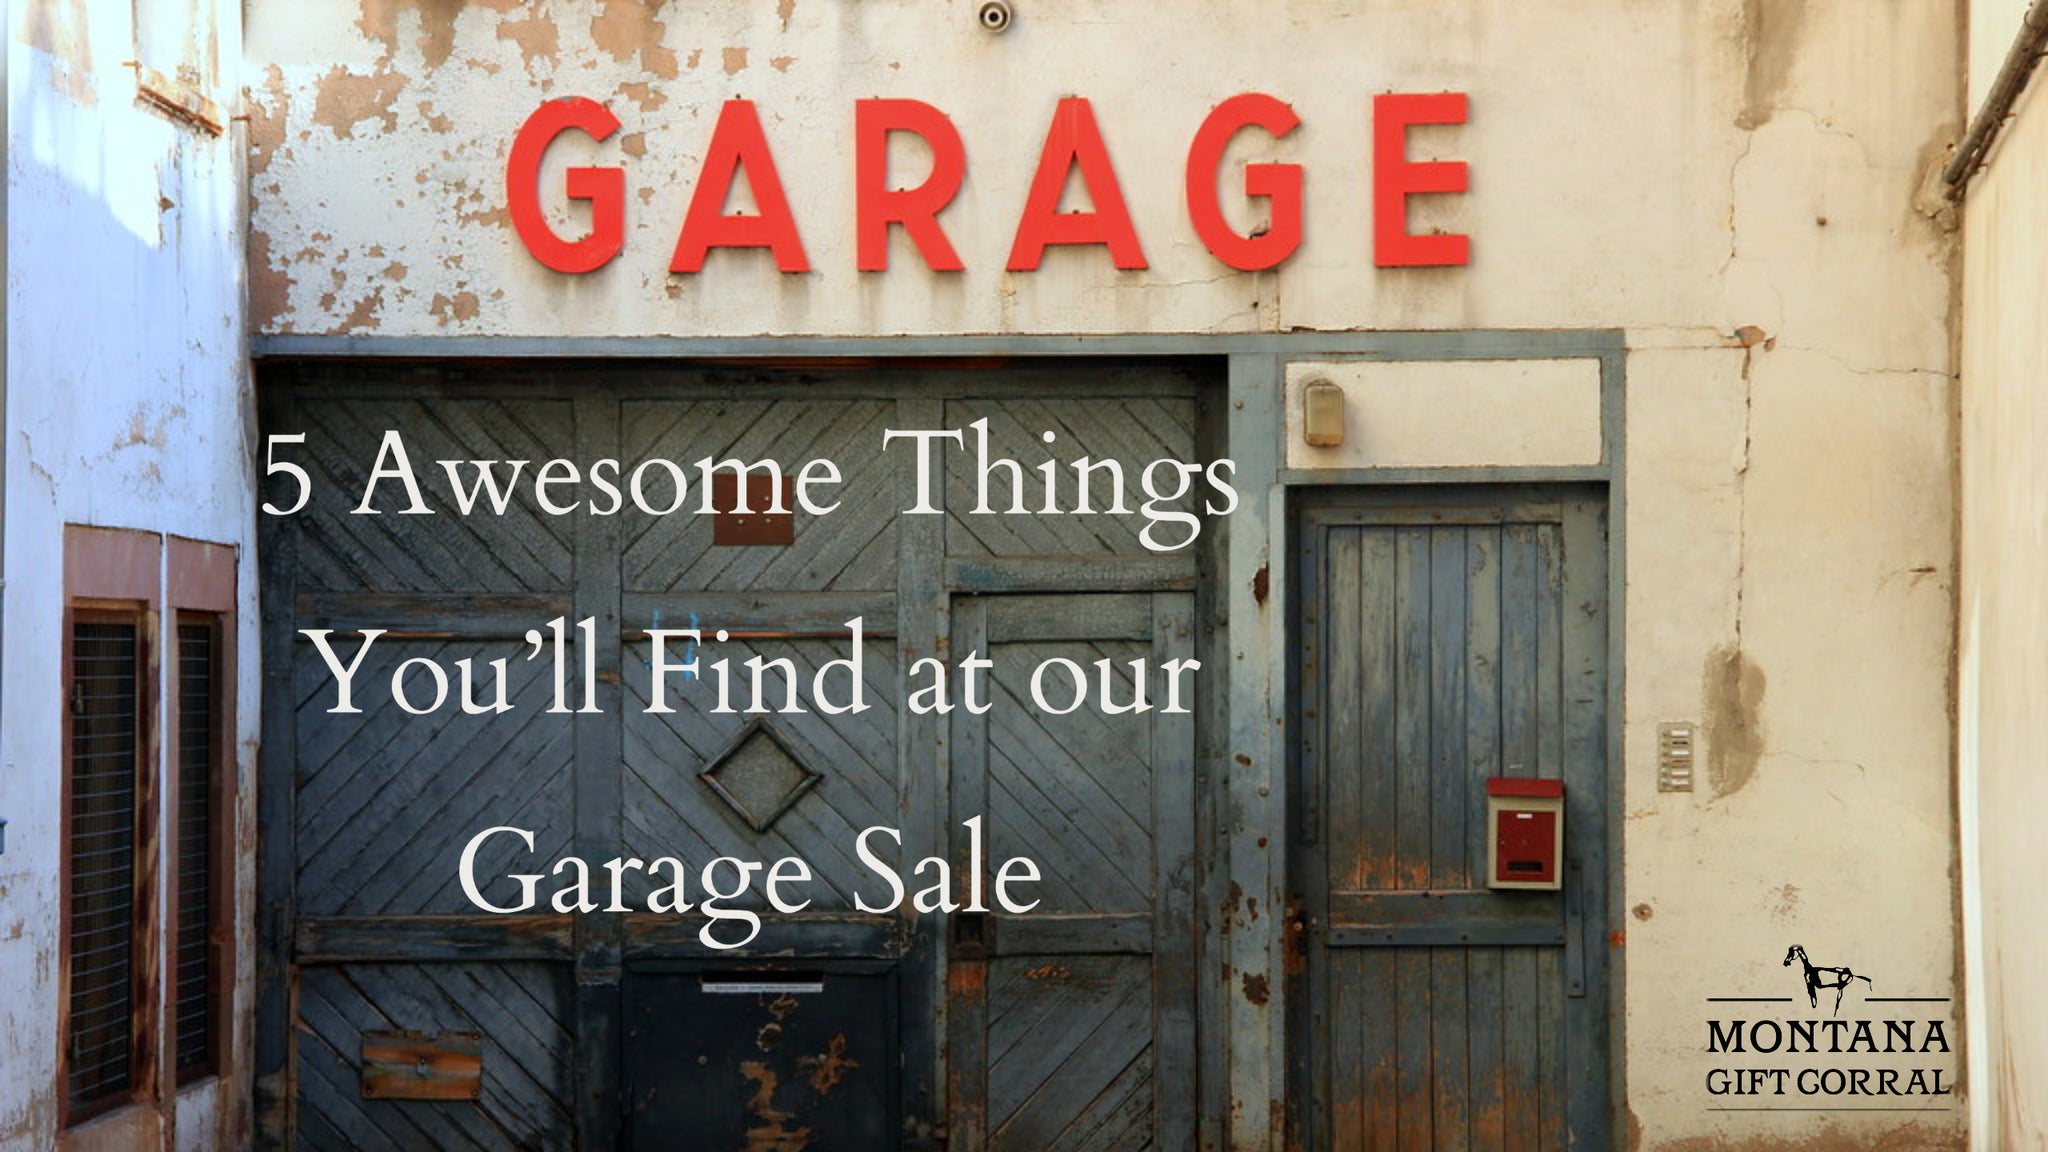 Five Awesome Things You'll Find at our Garage Sale